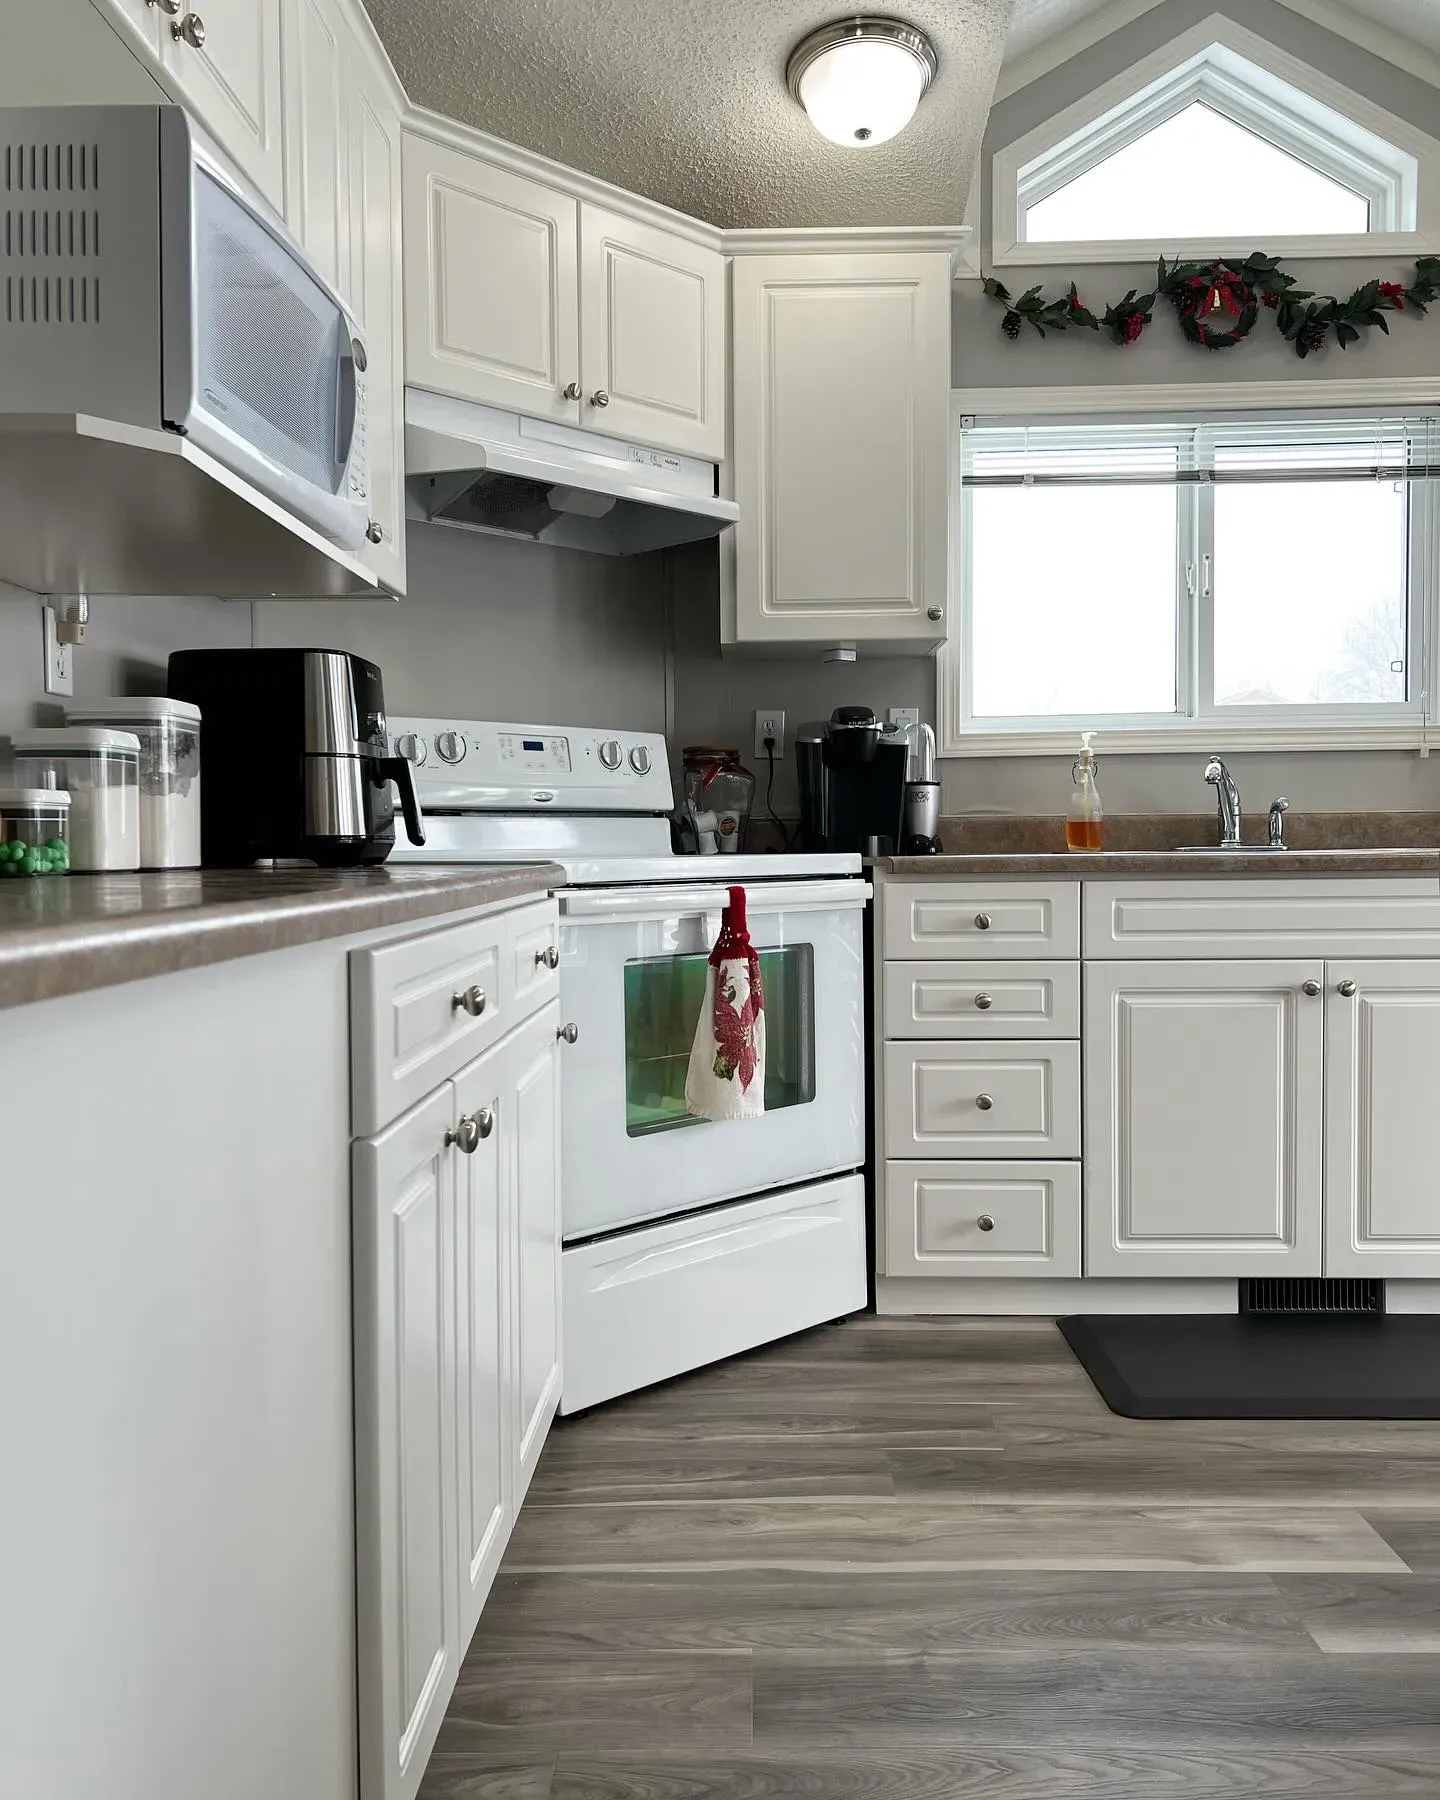 Behr Silky White kitchen cabinets review